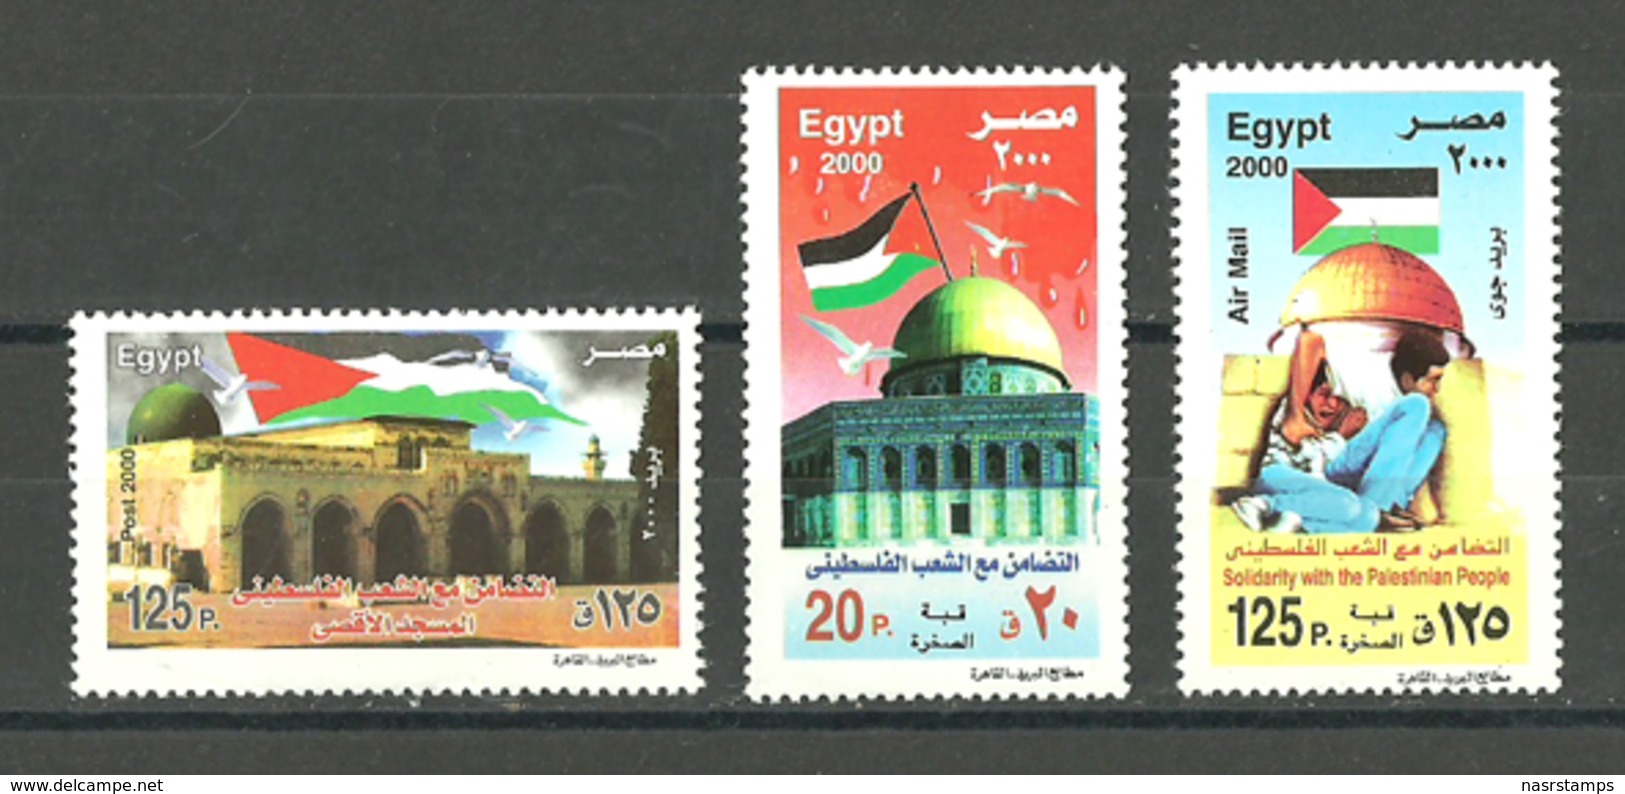 Egypt - 2000 - ( Solidarity With Palestinians, Dome Of The Rock, Jerusalem - Palestinian Boy & Father ) - MNH (**) - Emissions Communes